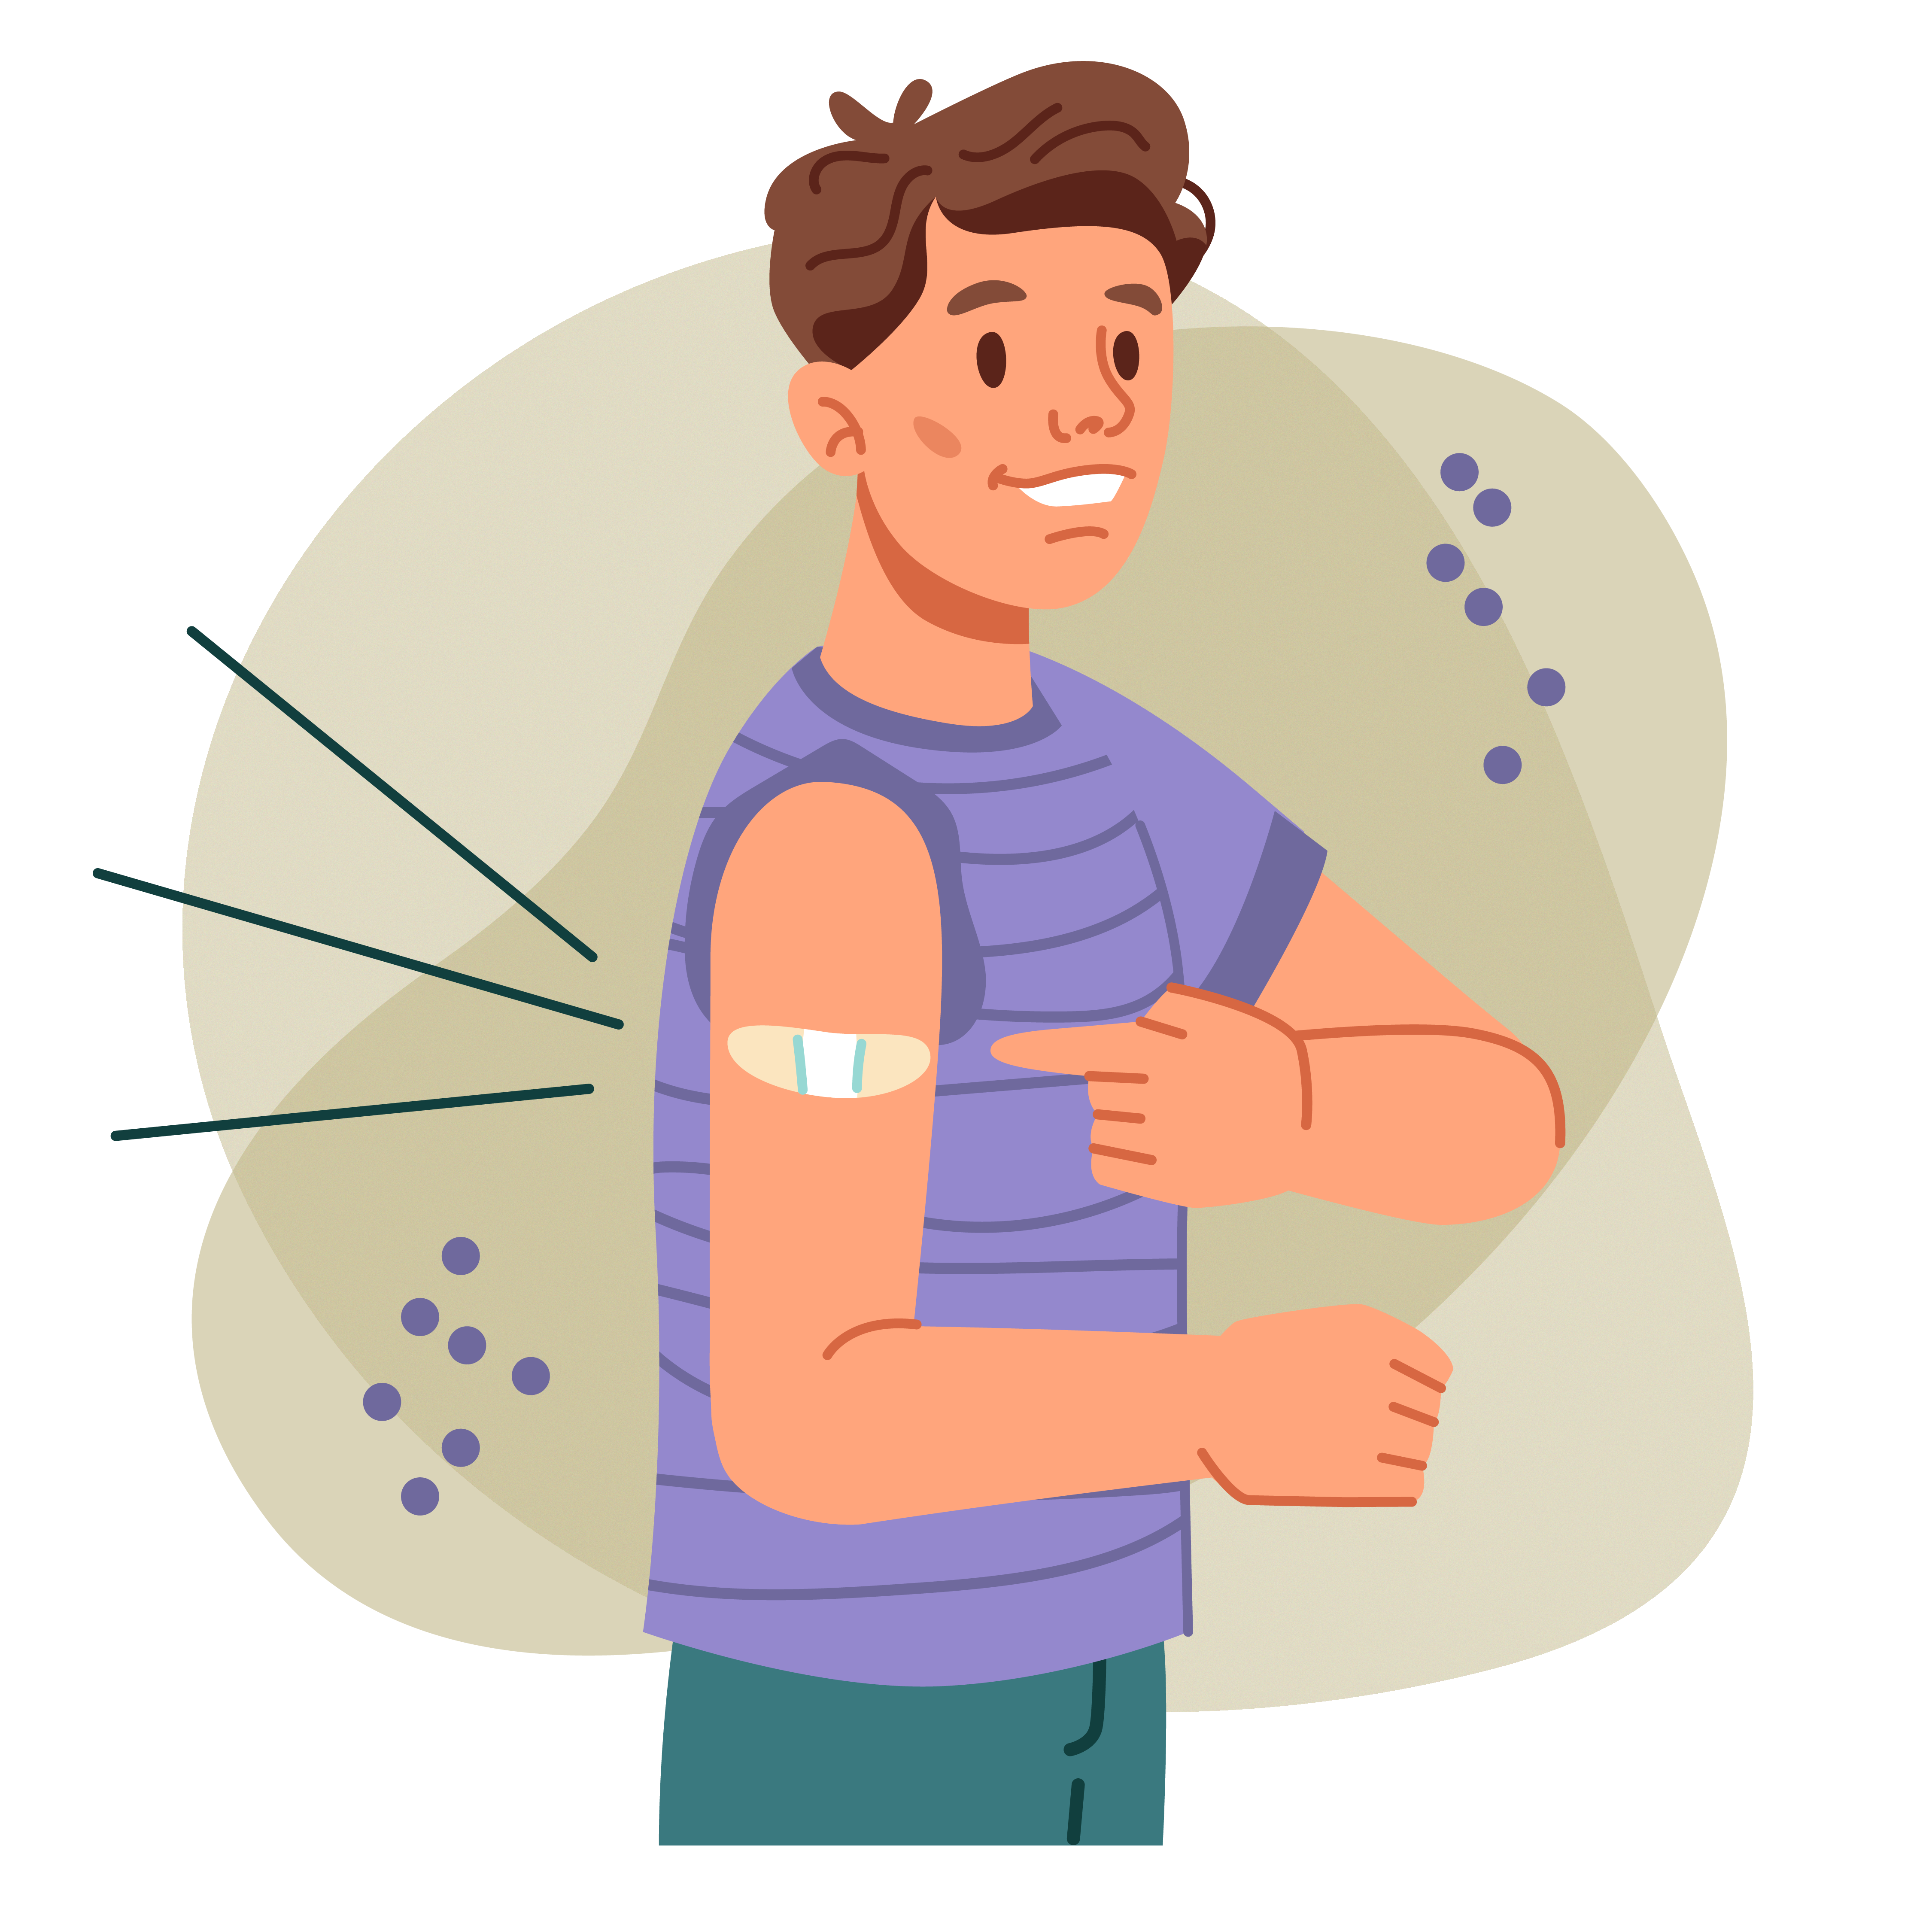 Stylized illustration of a person showing their arm with a bandage and pointing to it with their finger